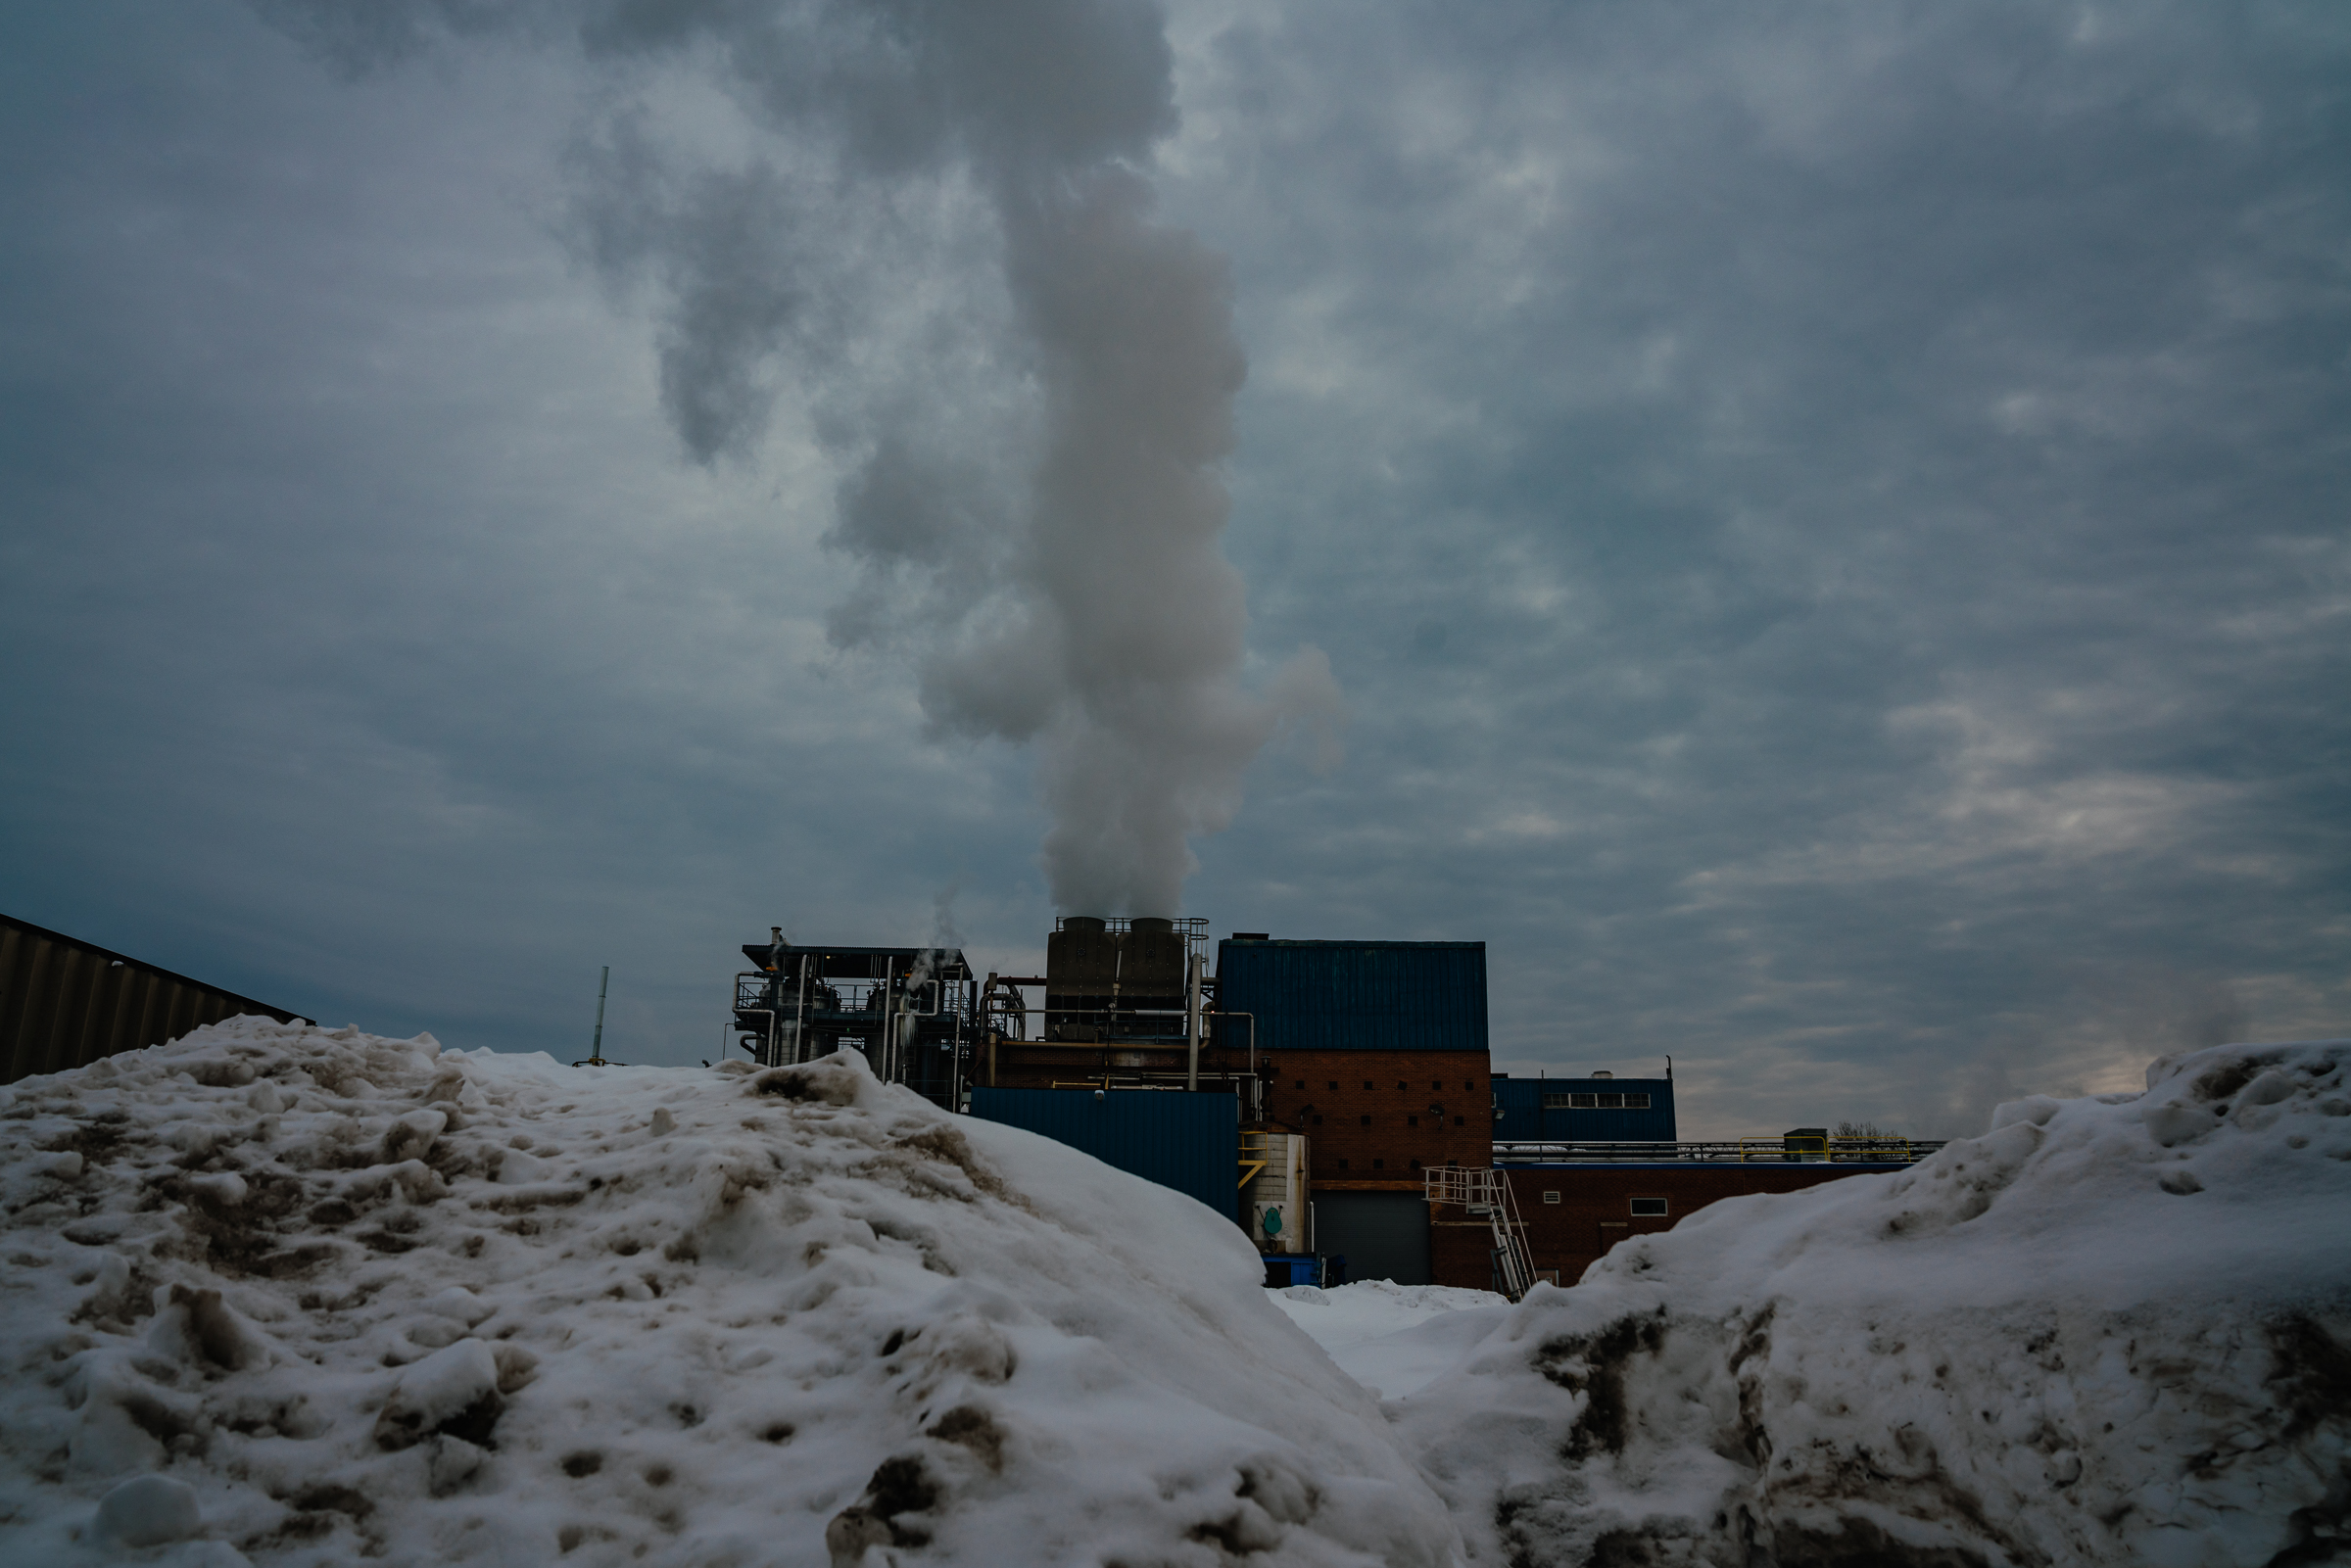 Vantage Specialty Chemicals, February 21, 2021. Vantage is located in Gurnee, IL and uses ethylene oxide to make other chemicals and consumer products. Photographed by Jamie Kelter Davis for The Intercept.